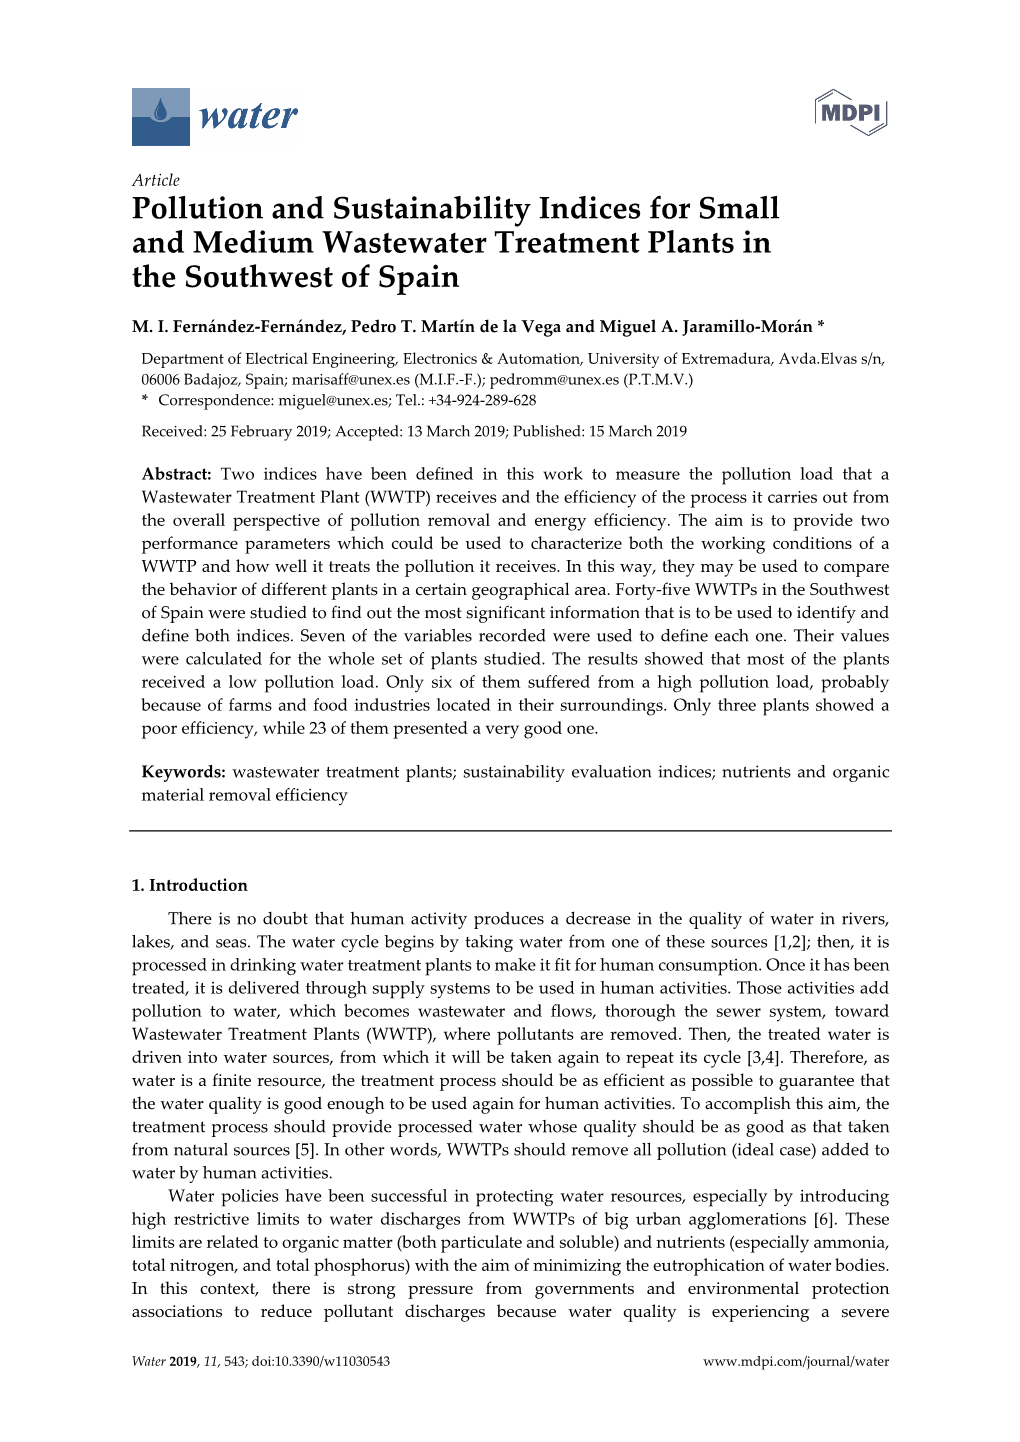 Pollution and Sustainability Indices for Small and Medium Wastewater Treatment Plants in the Southwest of Spain